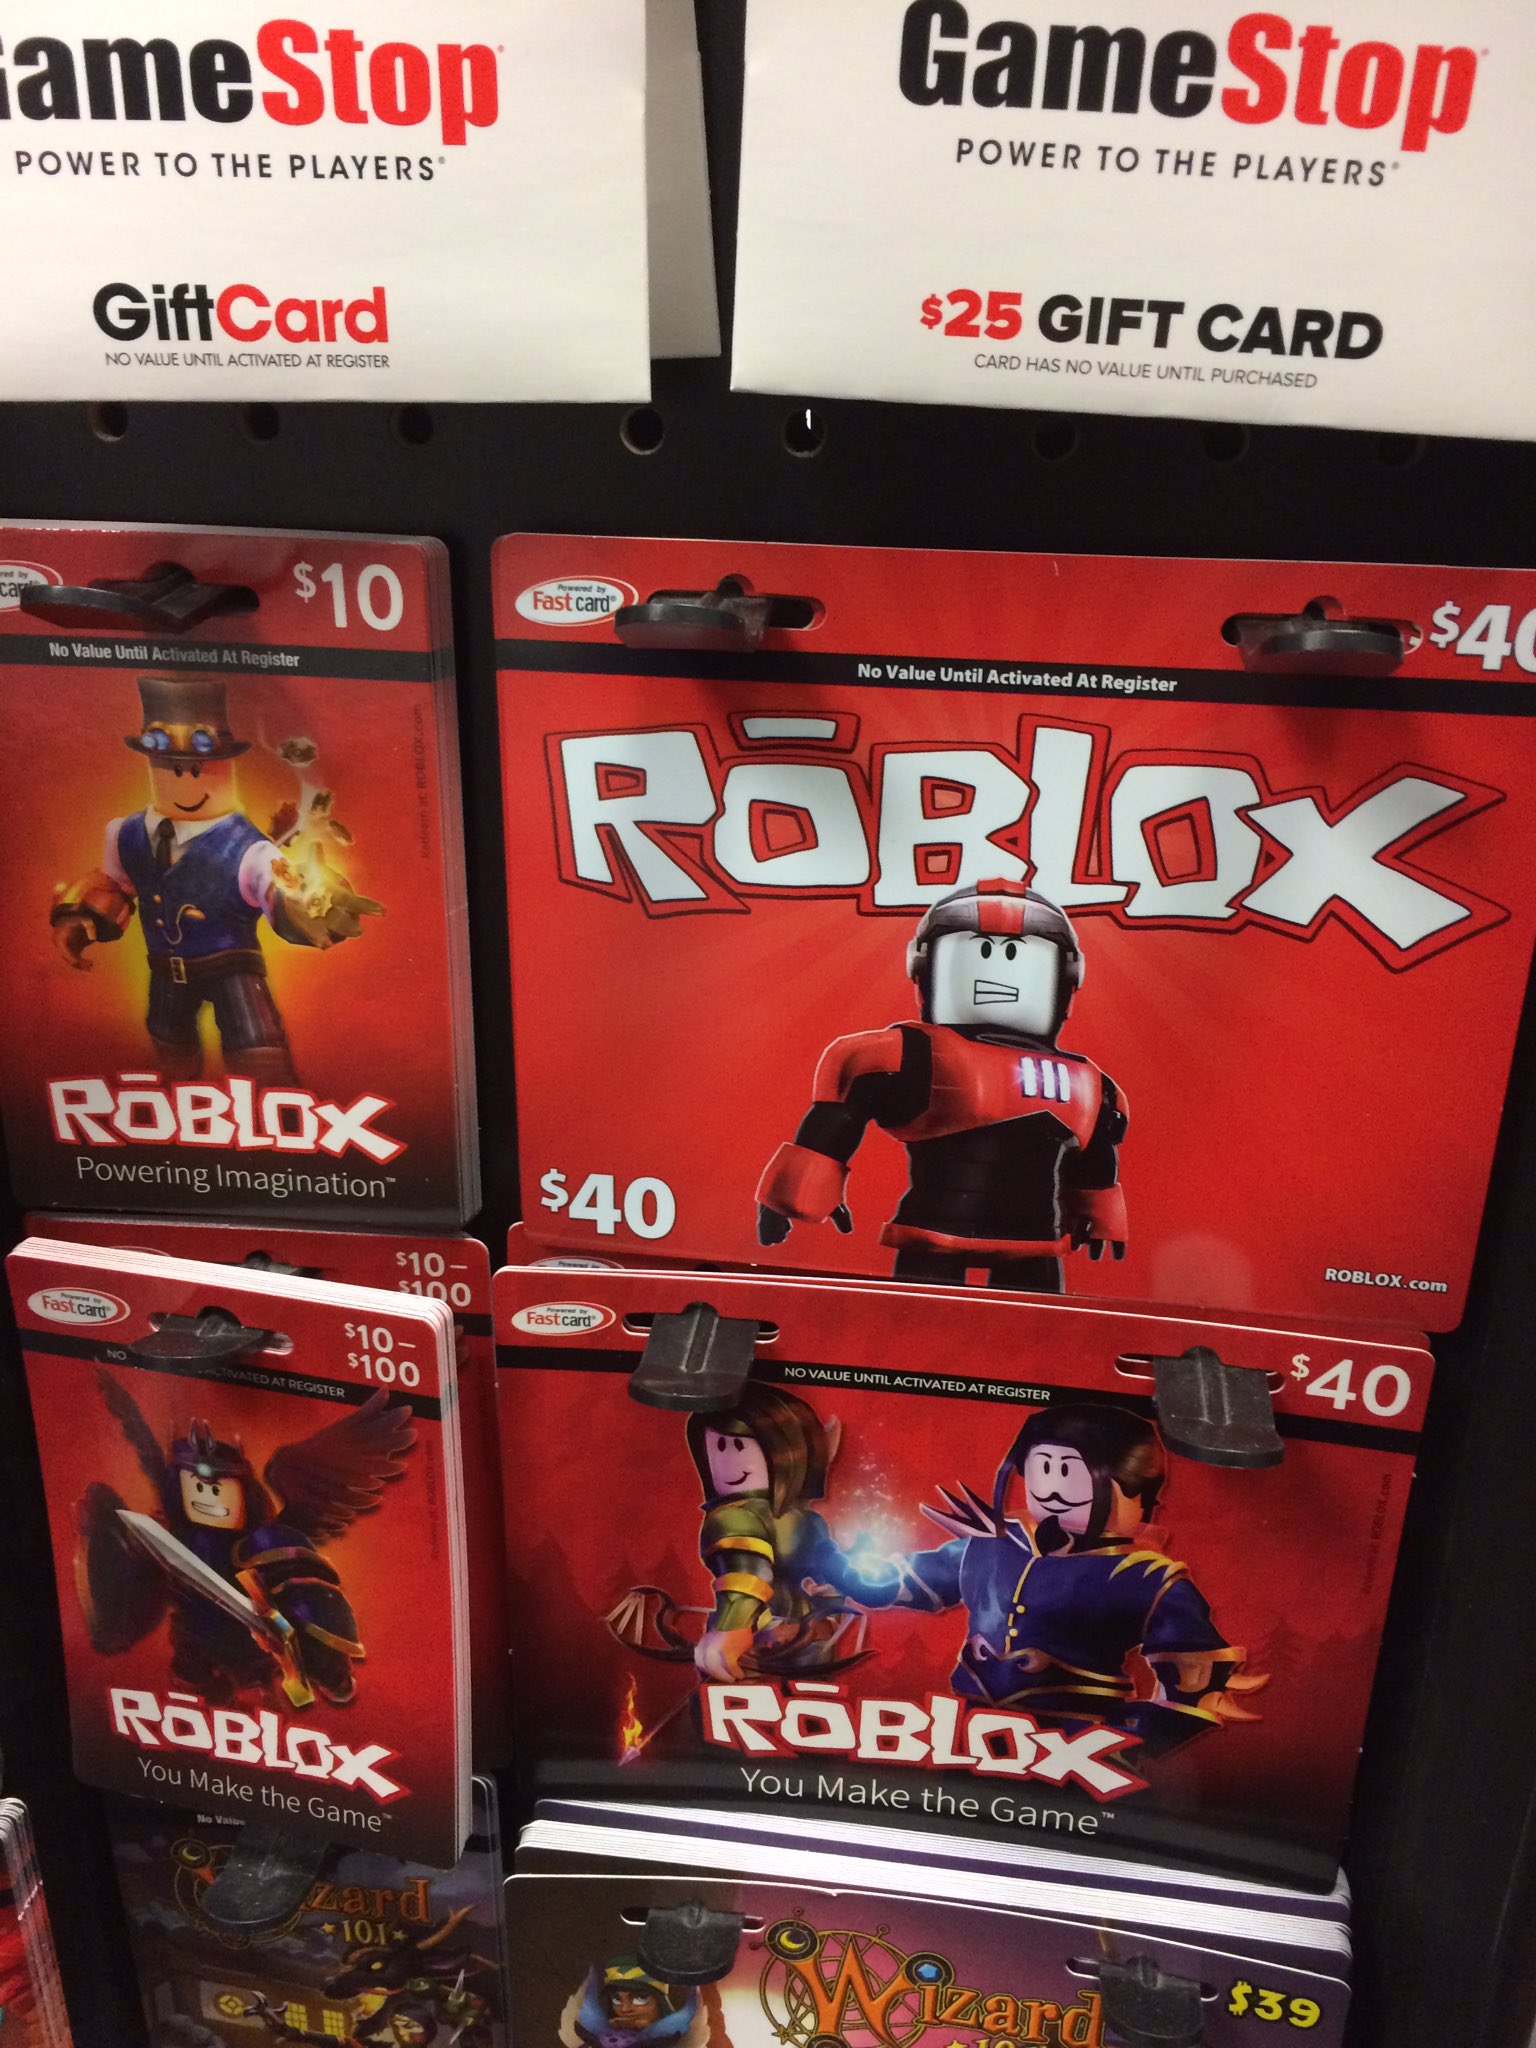 Evan Zirschky On Twitter Currently At Gamestop Buying The Roblox Cards For The Salvage Roblox 1k Follower Stream That S Hopefully Coming Up Soon Https T Co Qiea91rk9r - does gamestop have roblox figures